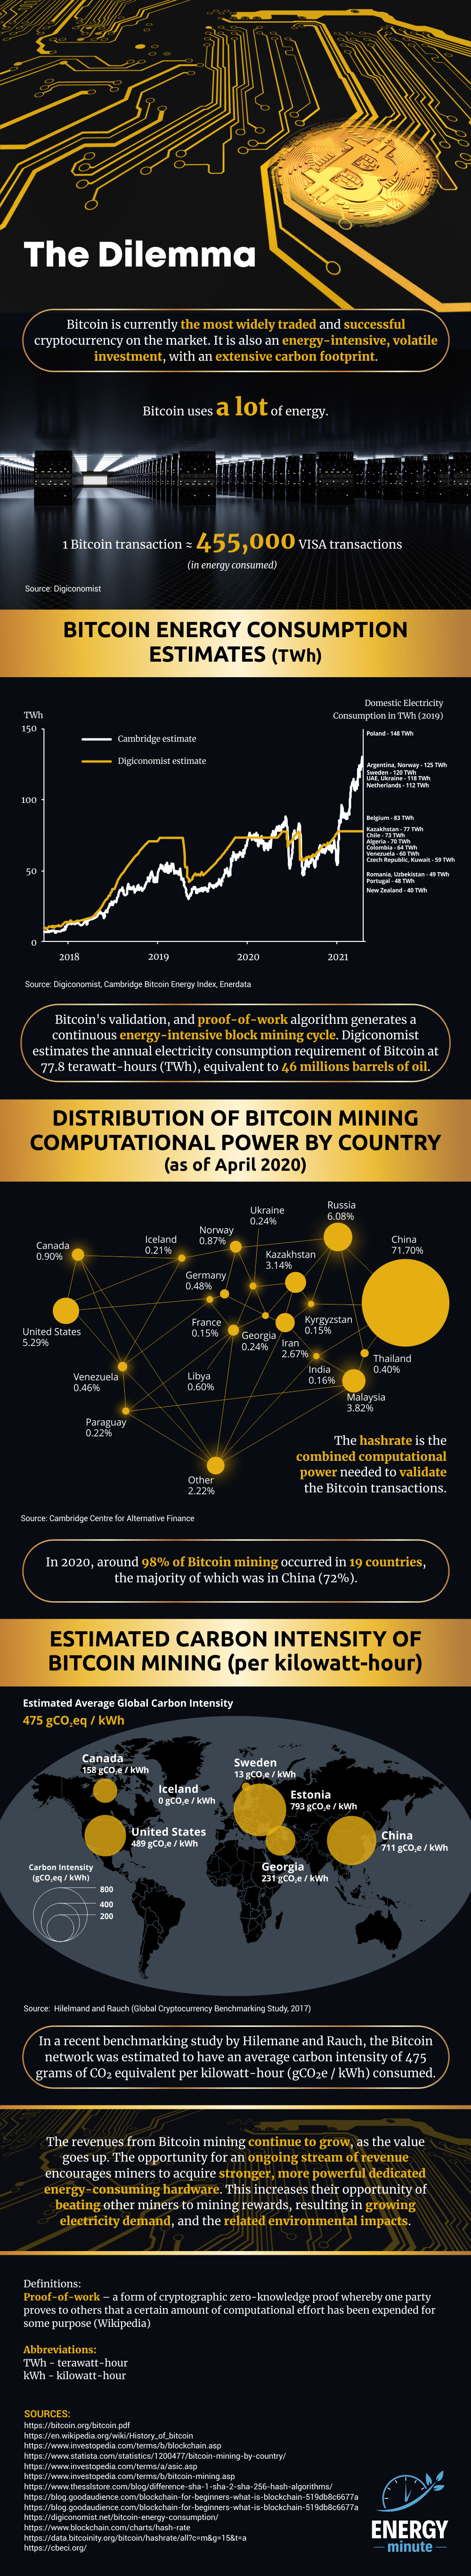 How Much Energy Does Bitcoin Actually Consume?